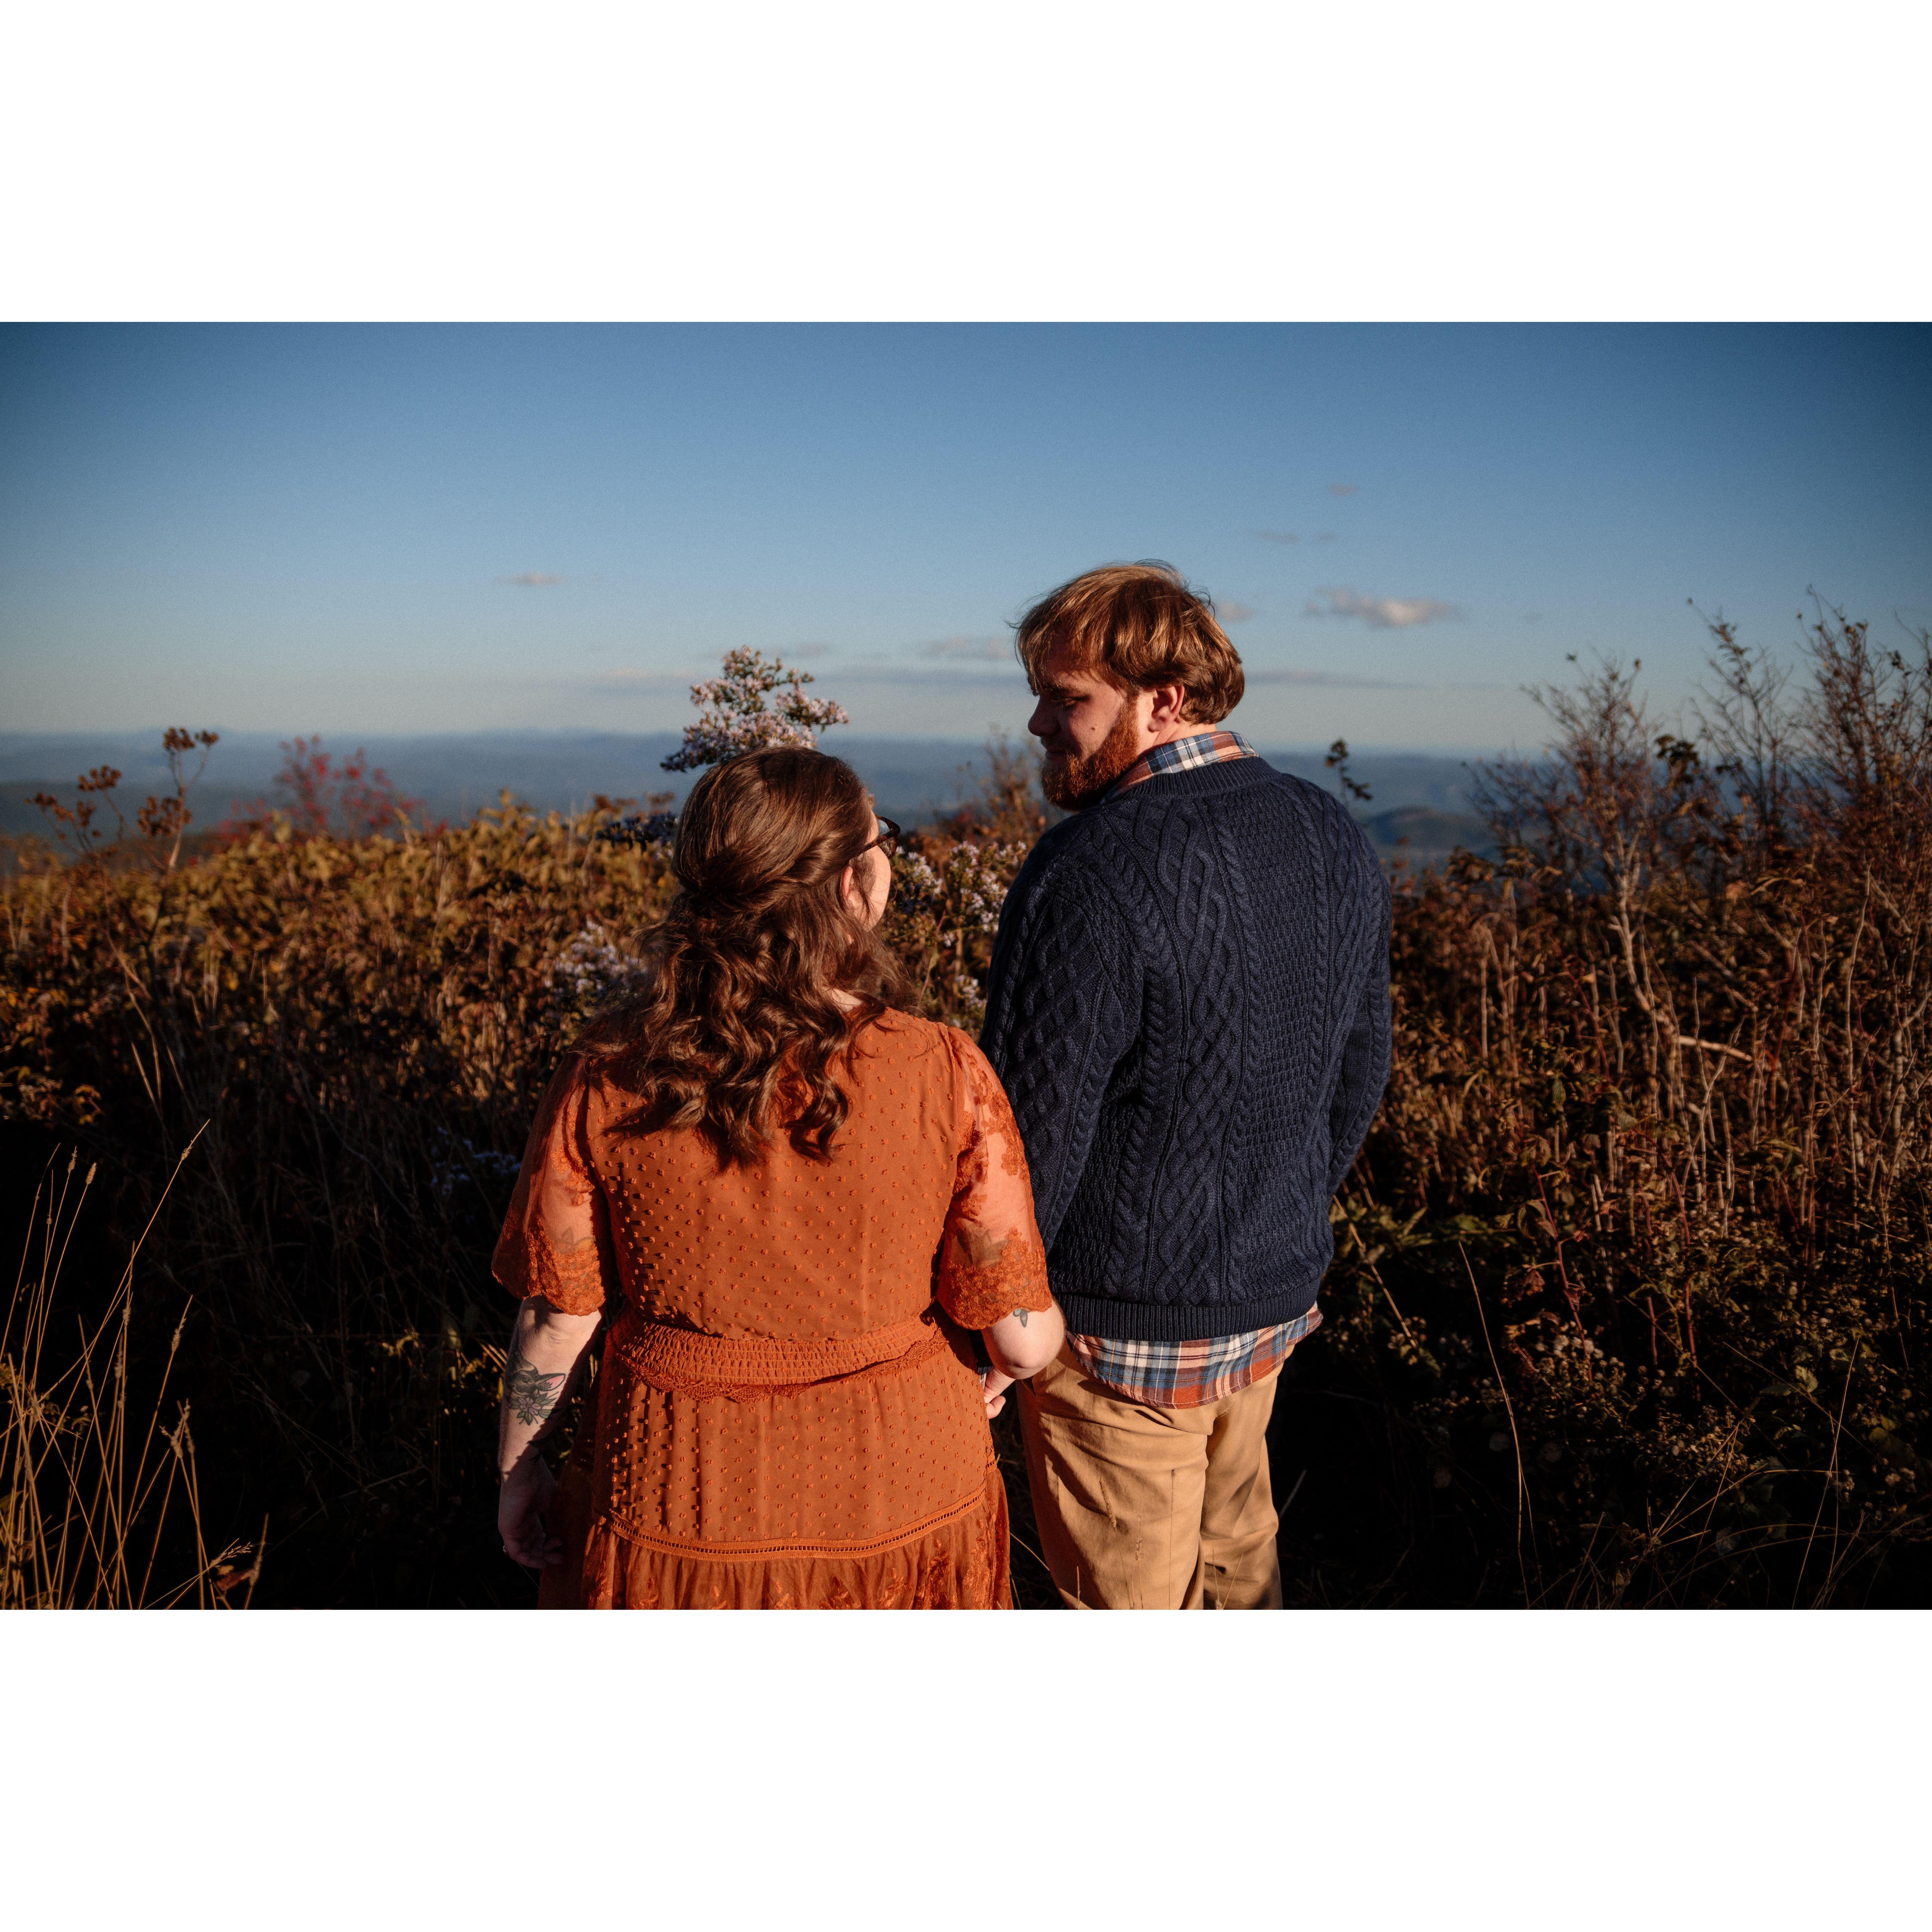 Gazing into each other's eyes in front of the gorgeous North Carolina mountains.

Taken by Simon Bonneau of Grand Jour Photography